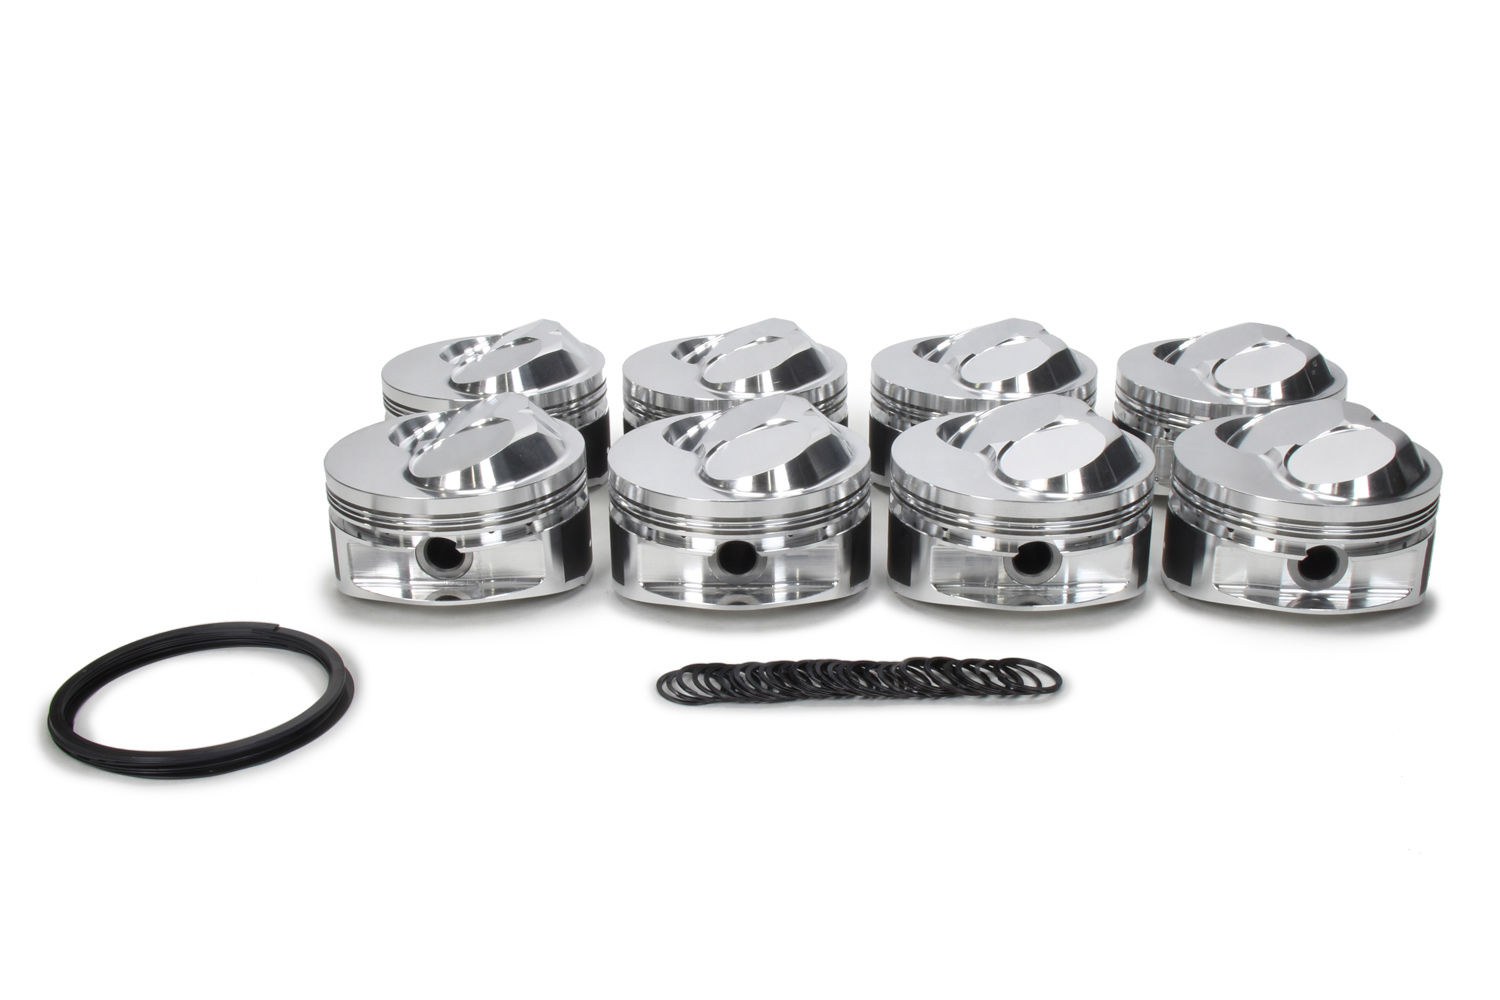 JE Pistons 258240 Piston, Big Block Open Chamber Dome, Forged, 4.560 in Bore, 1/16 x 1/16 x 3/16 in Ring Grooves, Plus 45.00 cc, Big Block Chevy, Set of 8